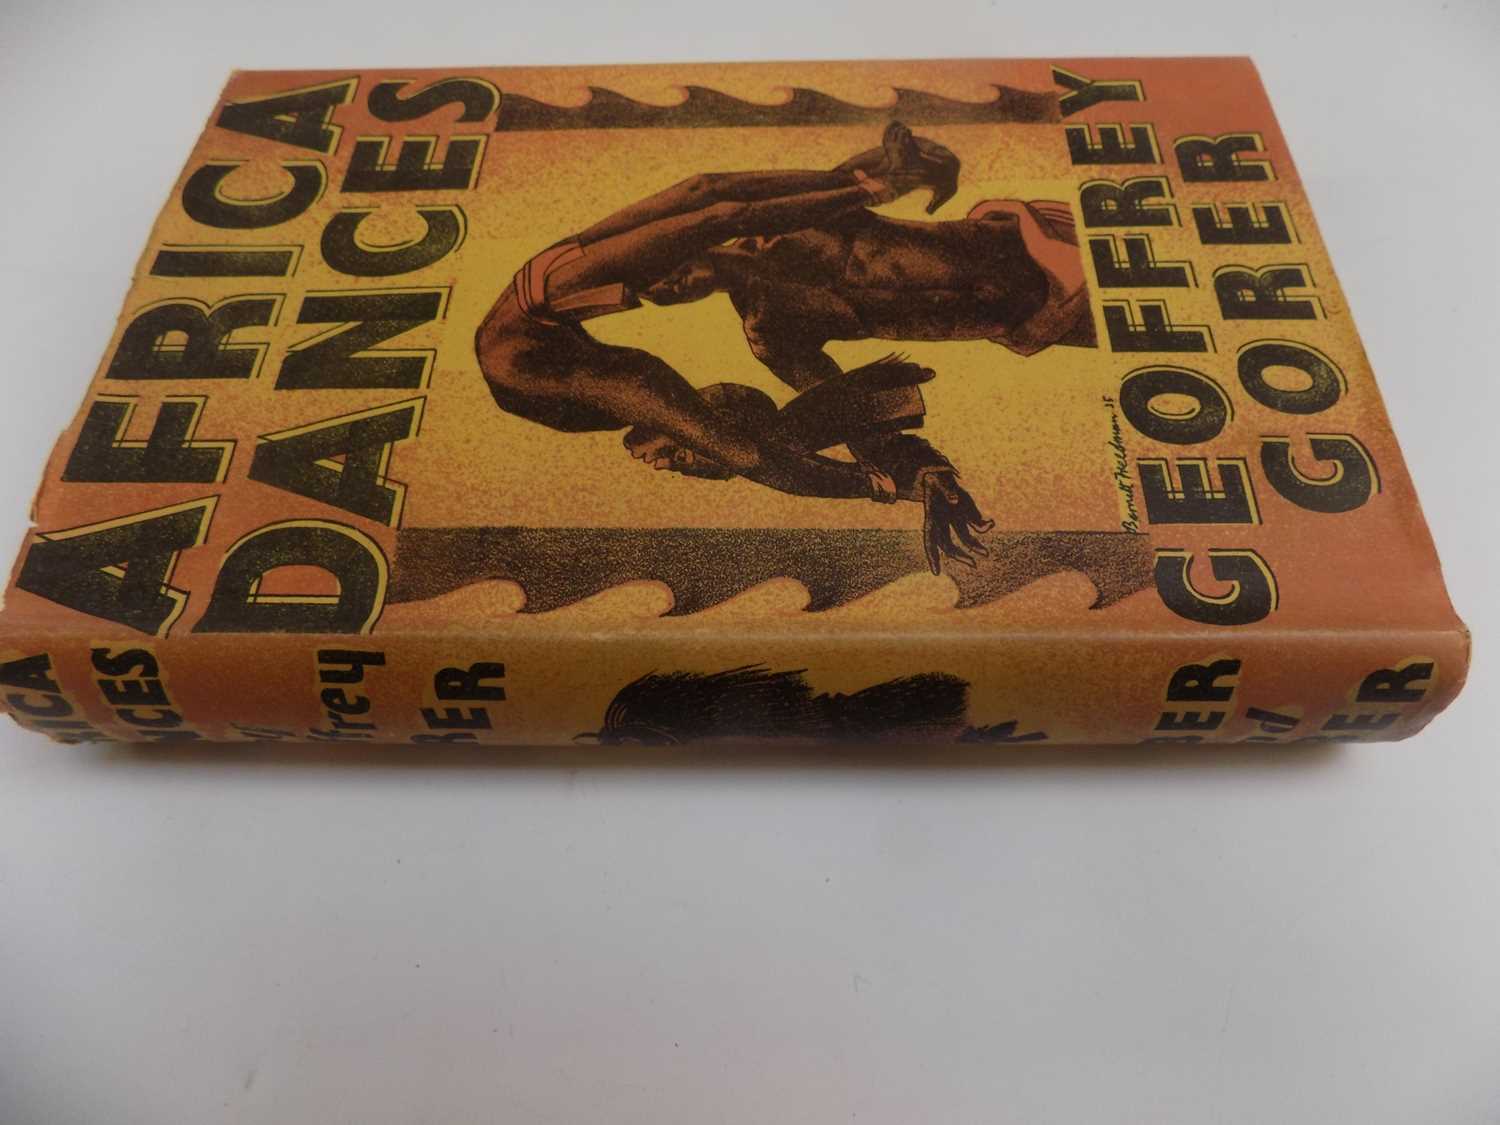 GORER (GEOFFREY.) "Africa Dances, a book about West African Negroes." 2nd imp, plts, maps etc